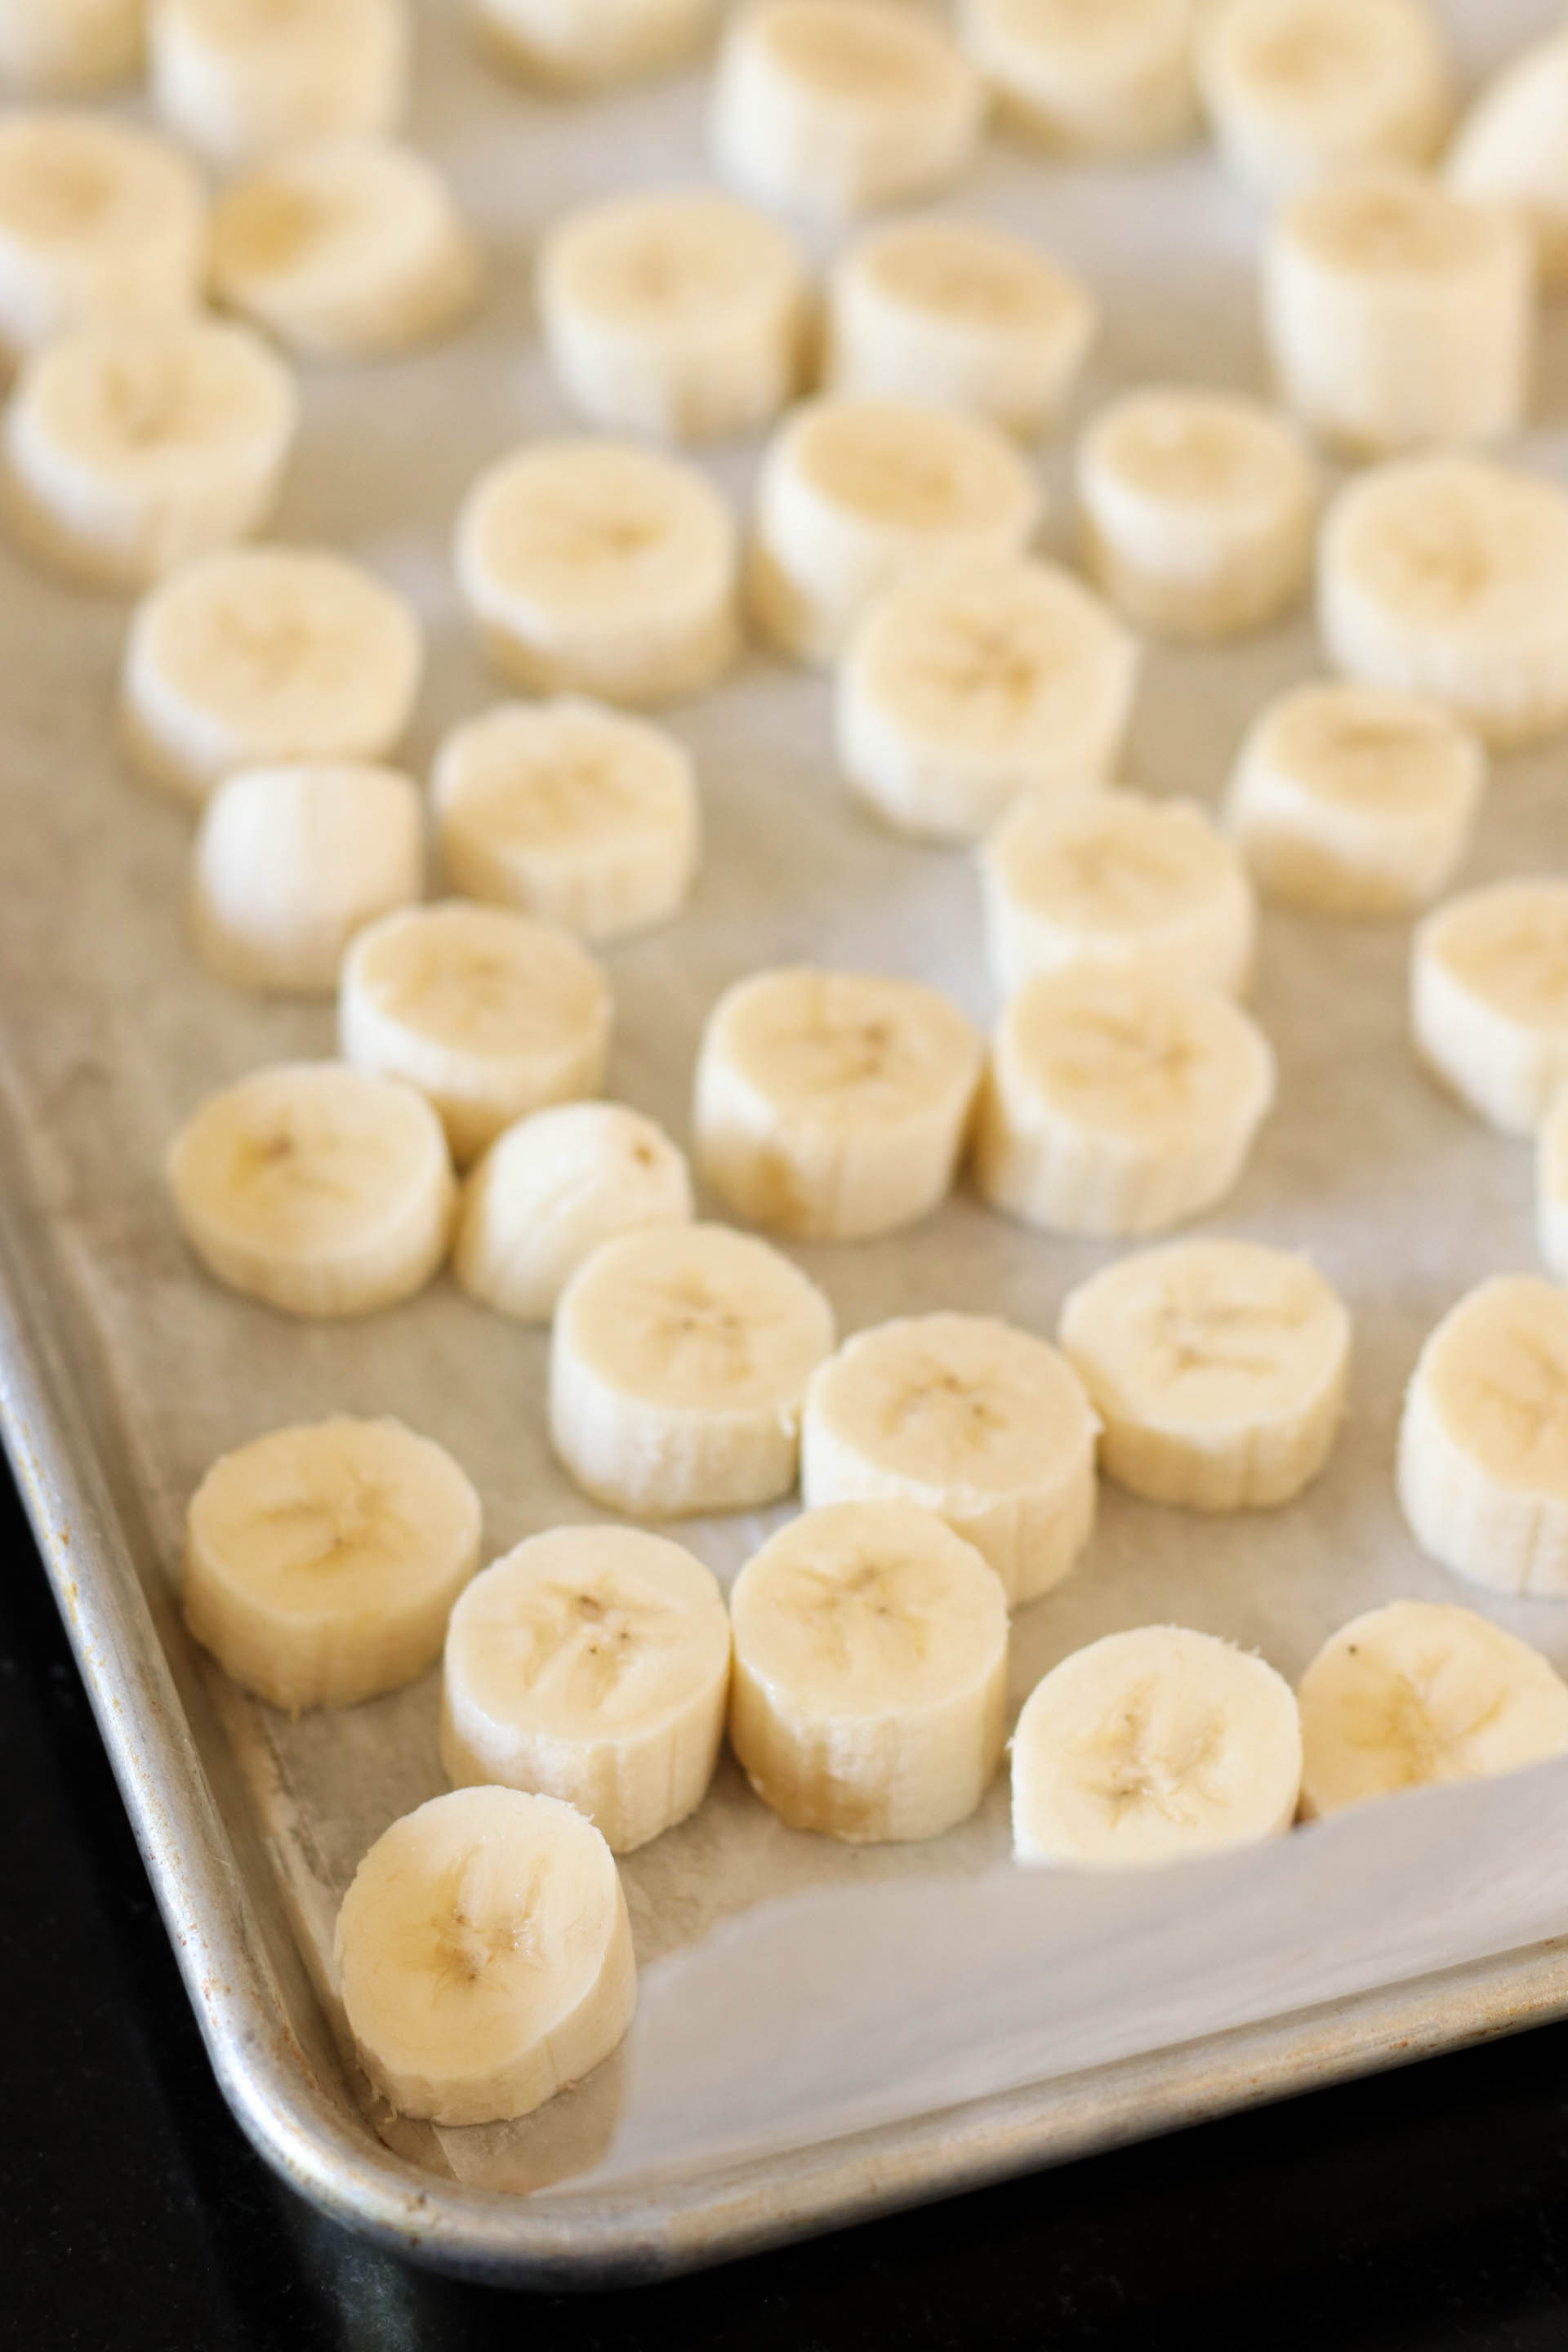 sliced frozen bananas on a sheet pan lined with wax paper